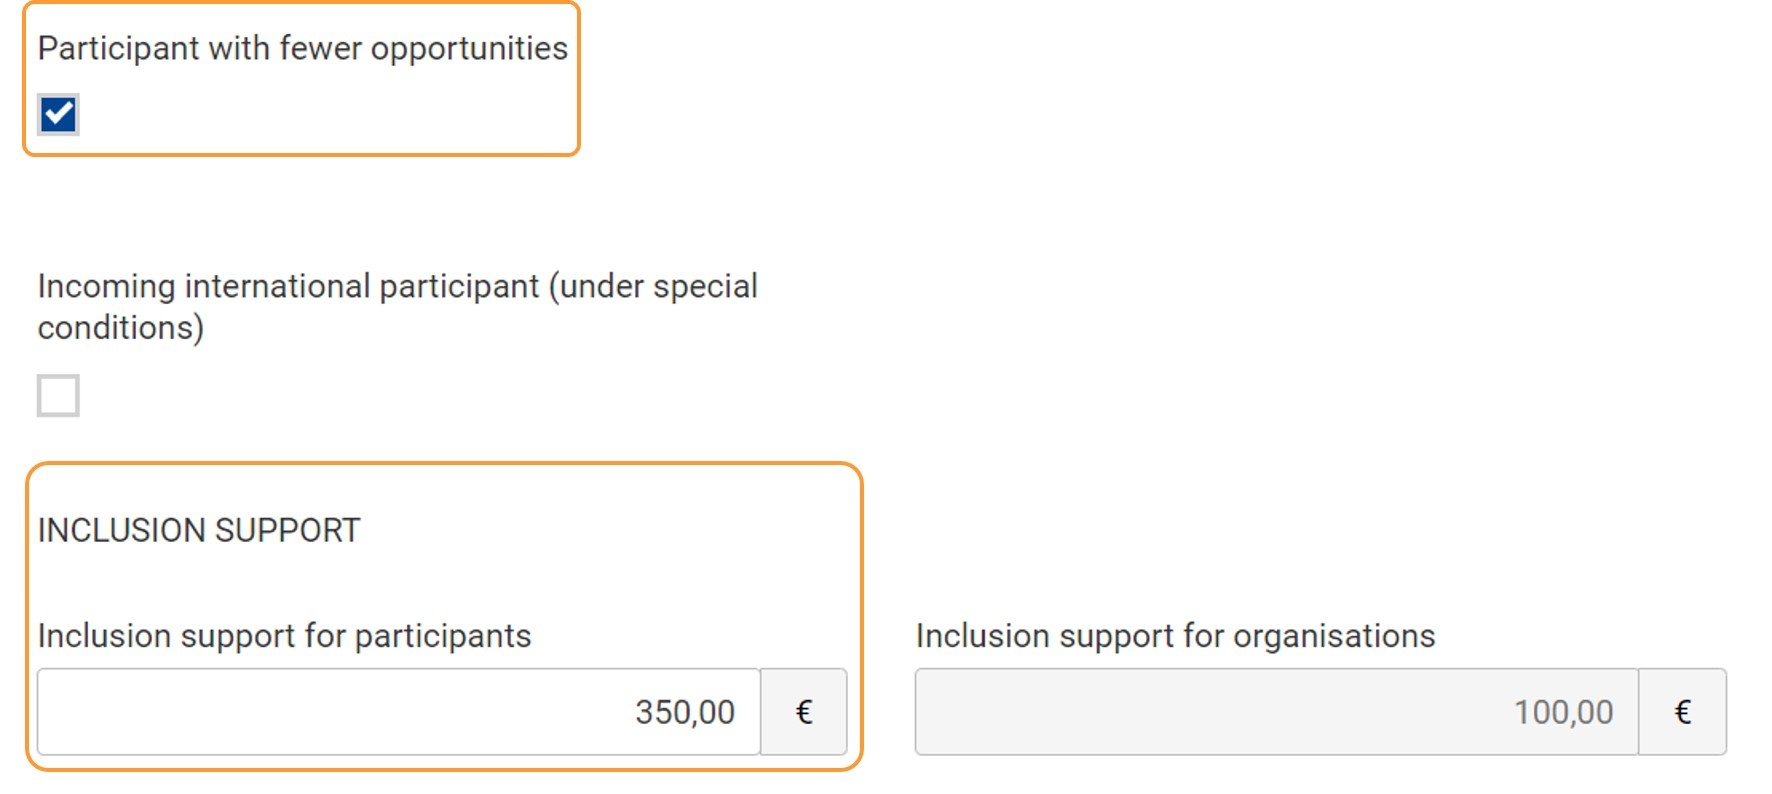 Inclusion support